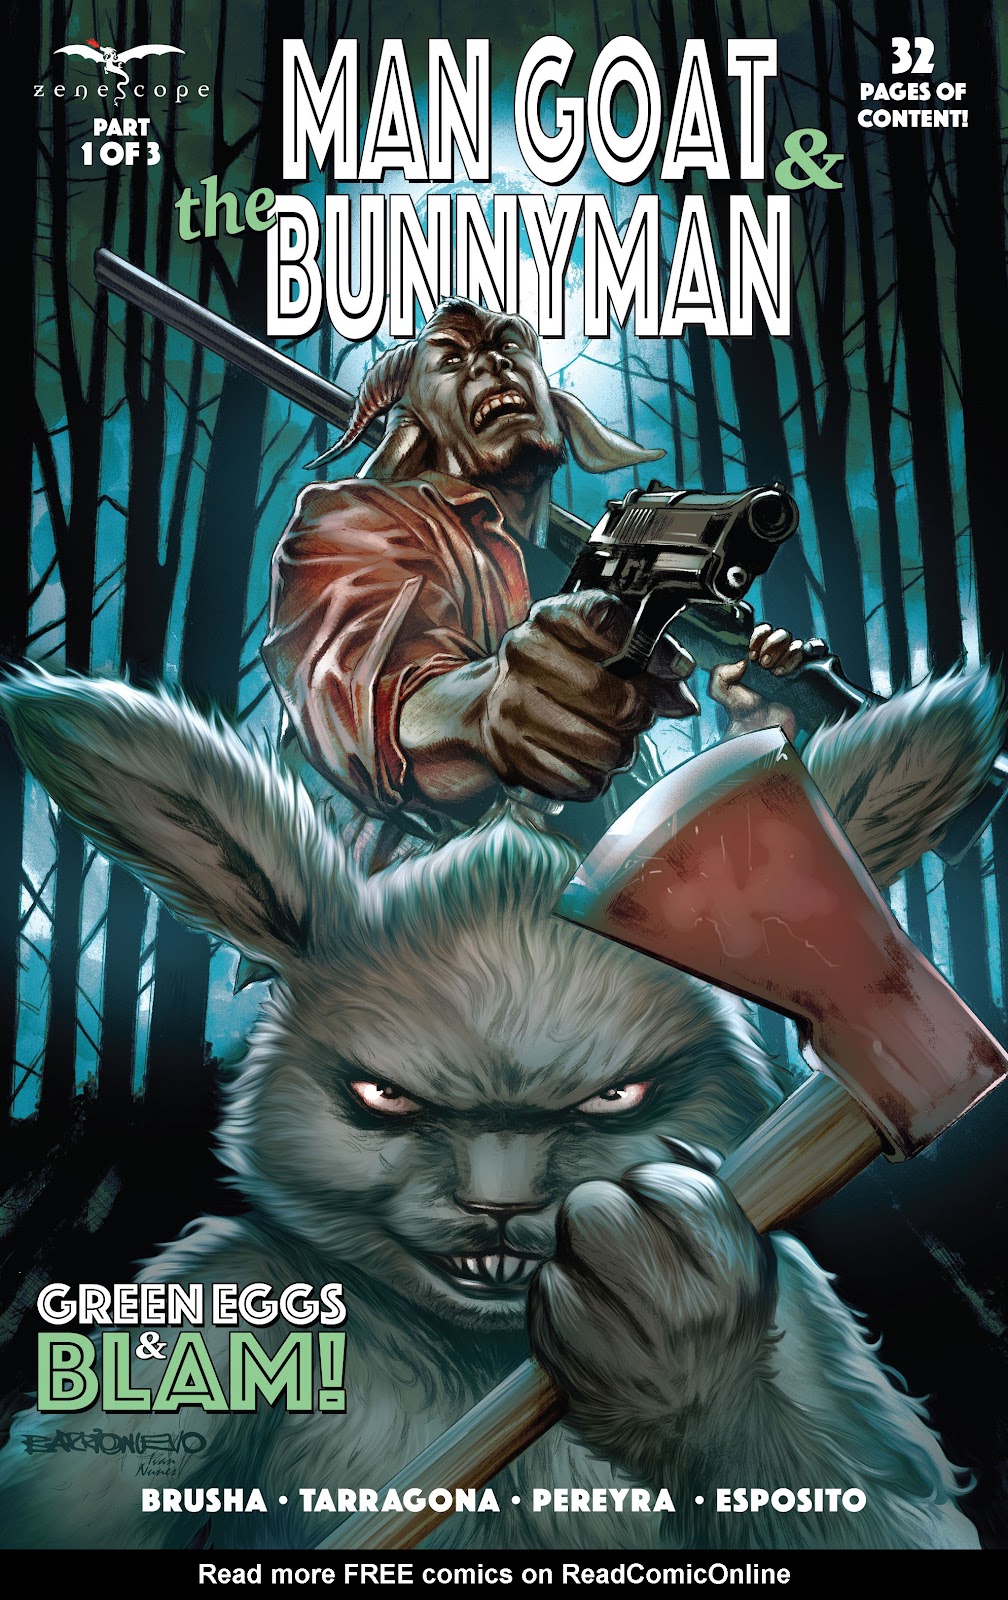 Man Goat & the Bunnyman: Green Eggs & Blam issue 1 - Page 1